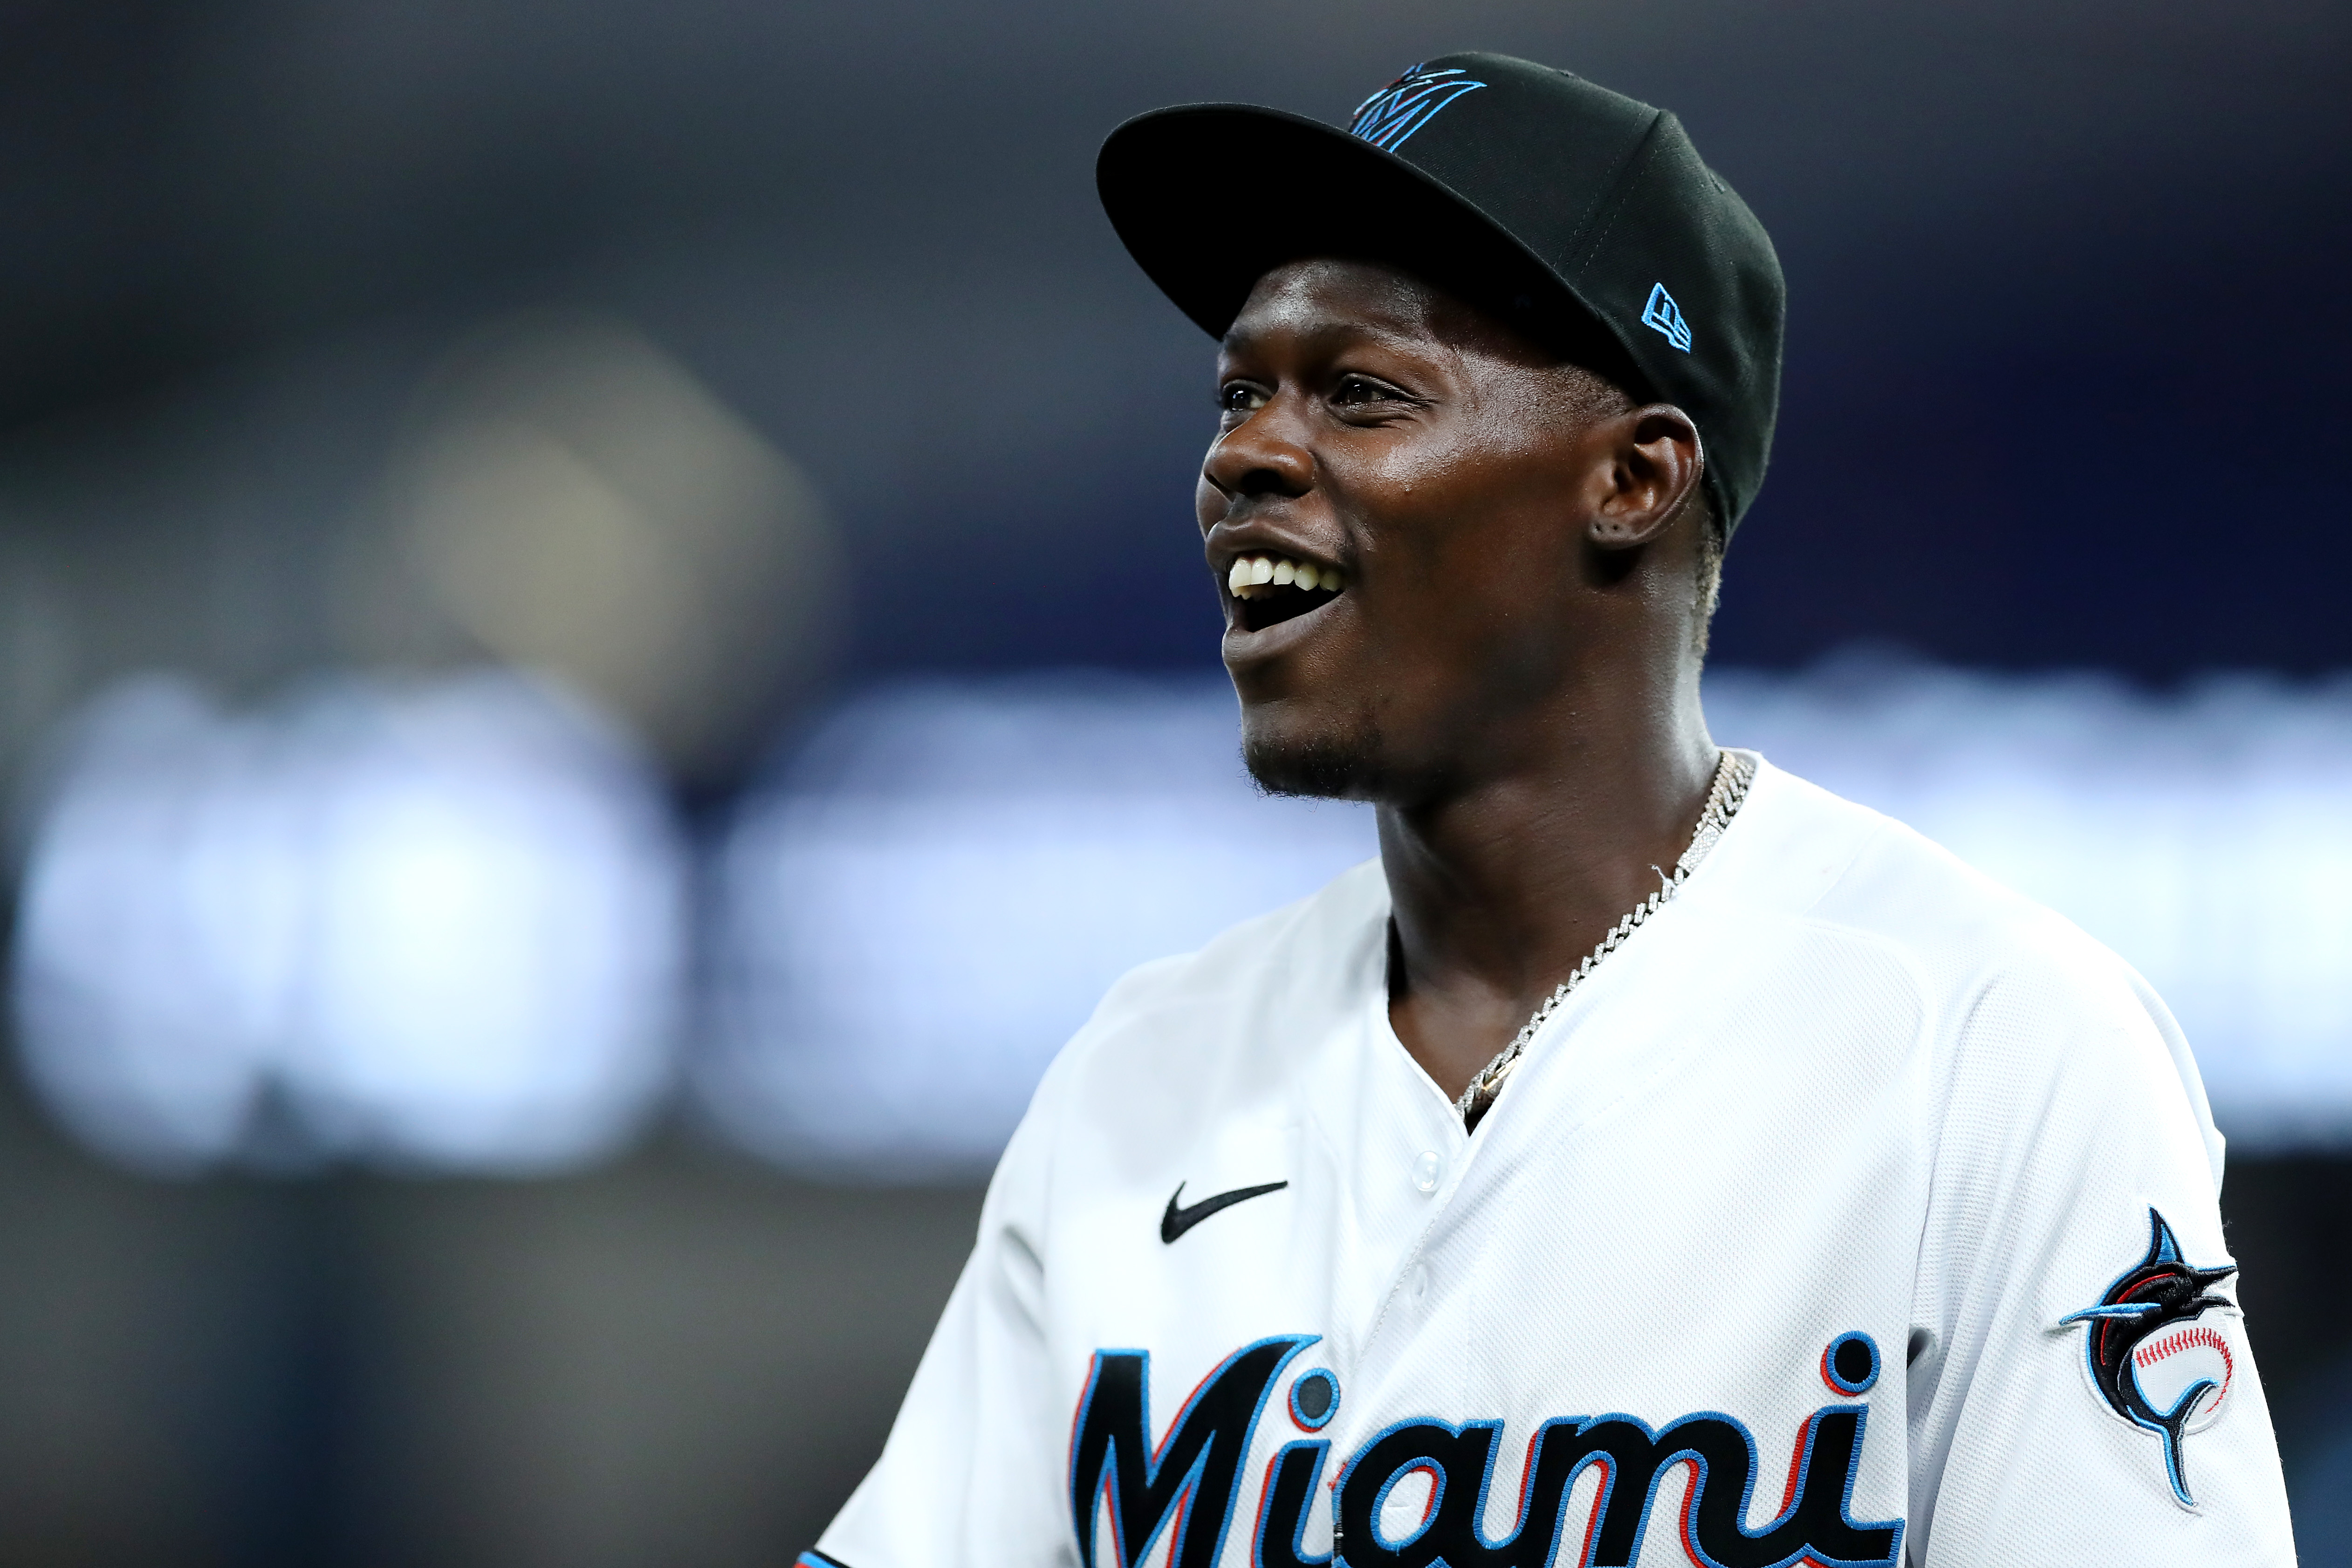 Jazz Chisholm Jr. #2 of the Miami Marlins reacts during the fourth inning against the St. Louis Cardinals at loanDepot park on April 21, 2022 in Miami, Florida.